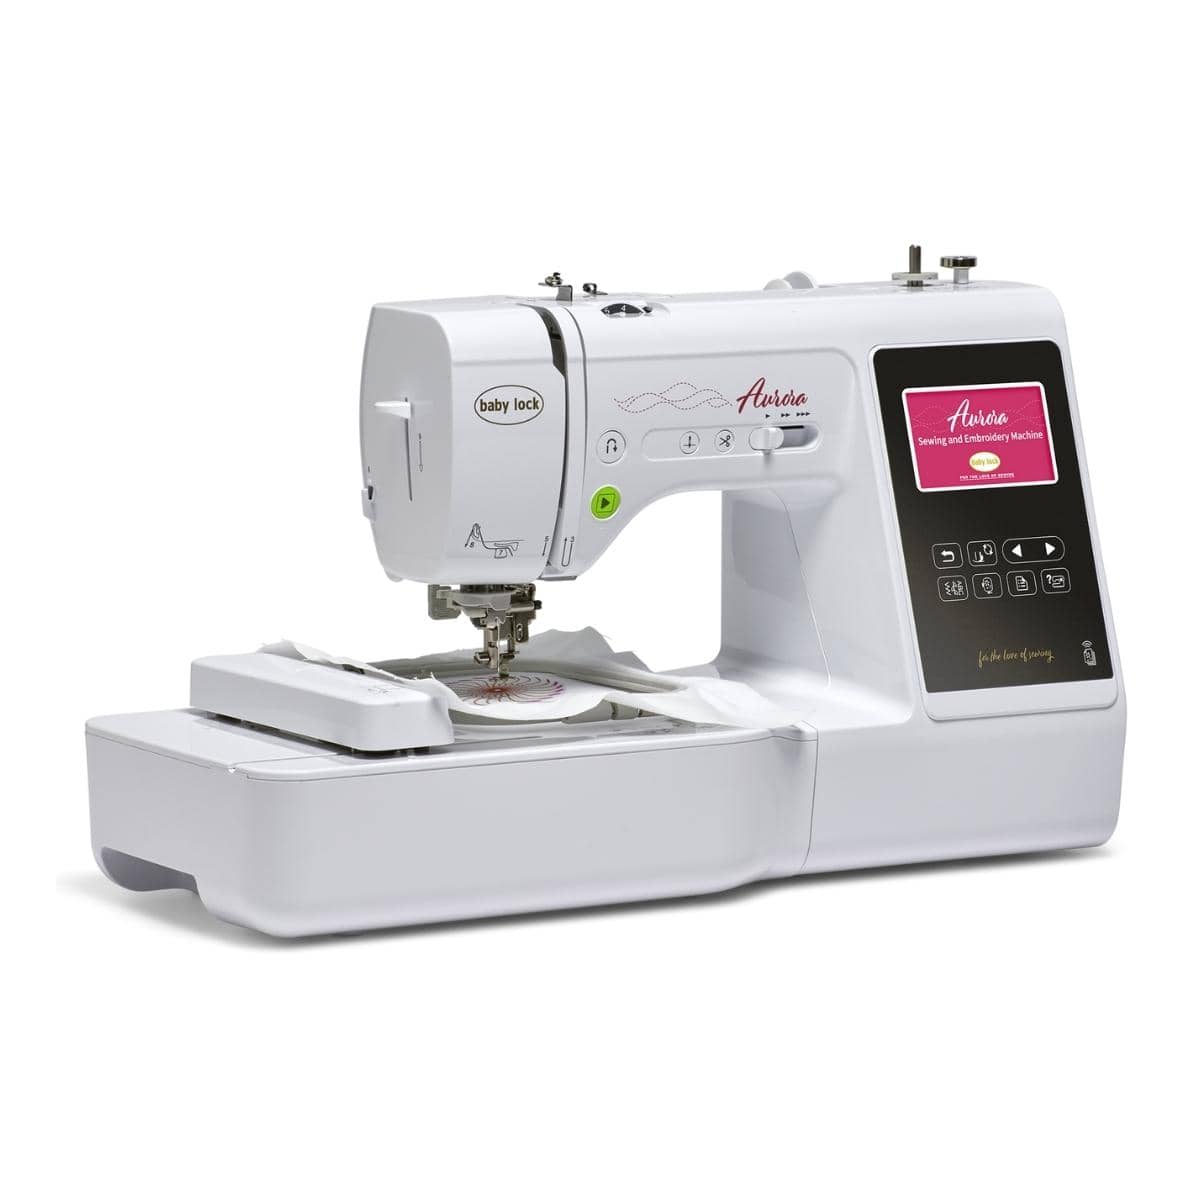 Baby Lock Aurora sewing & embroidery machine - Moore's Sewing